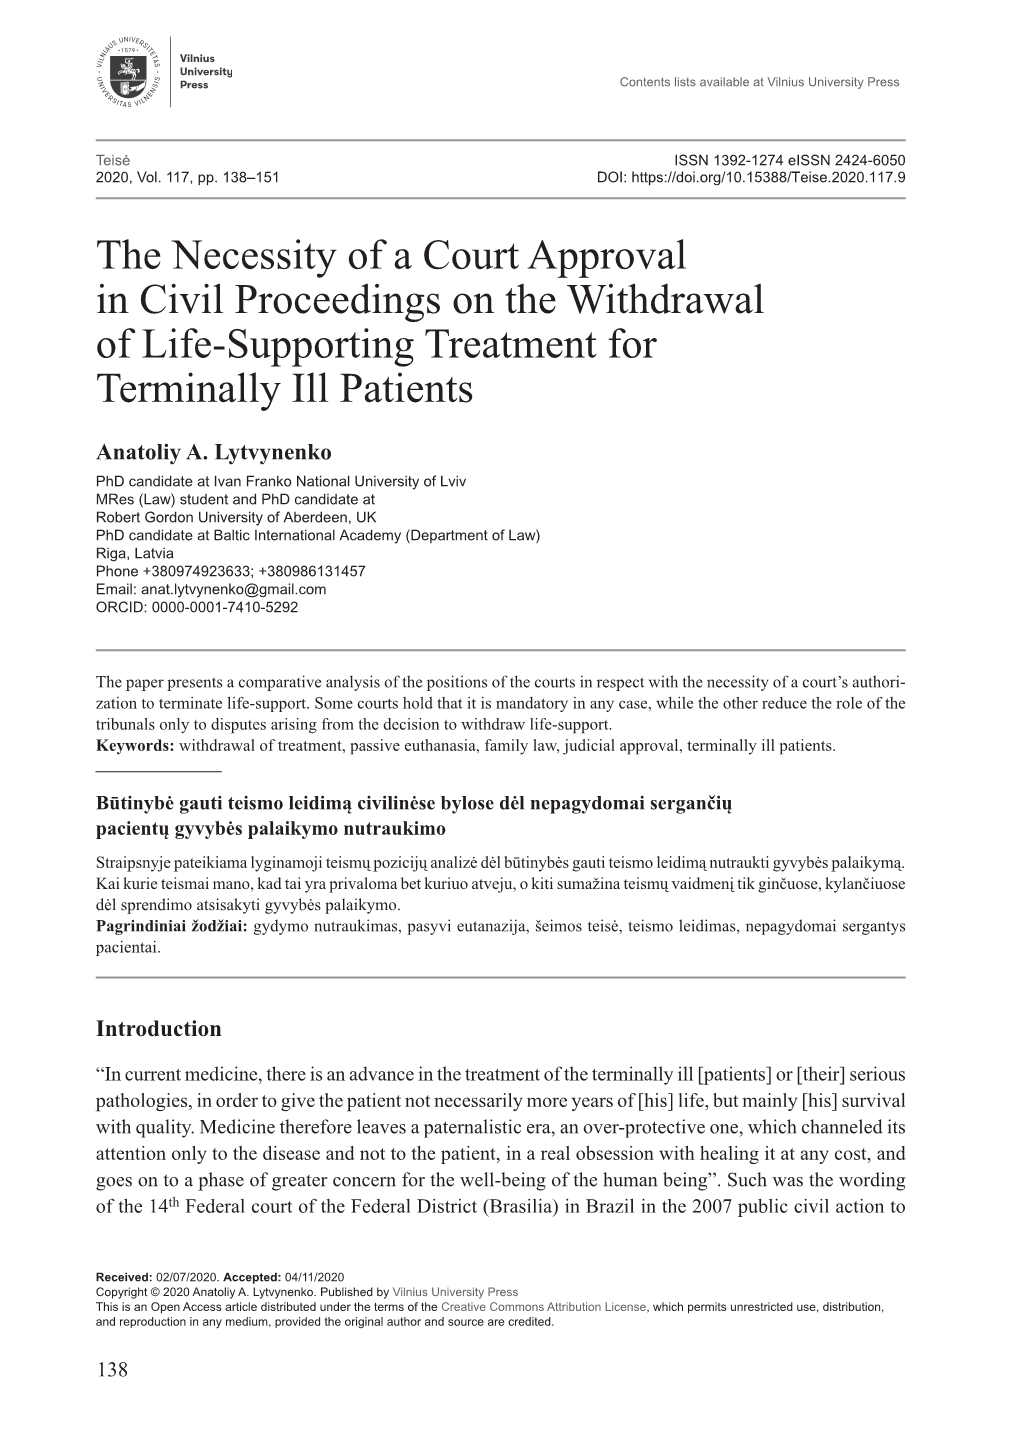 The Necessity of a Court Approval in Civil Proceedings on the Withdrawal of Life-Supporting Treatment for Terminally Ill Patients